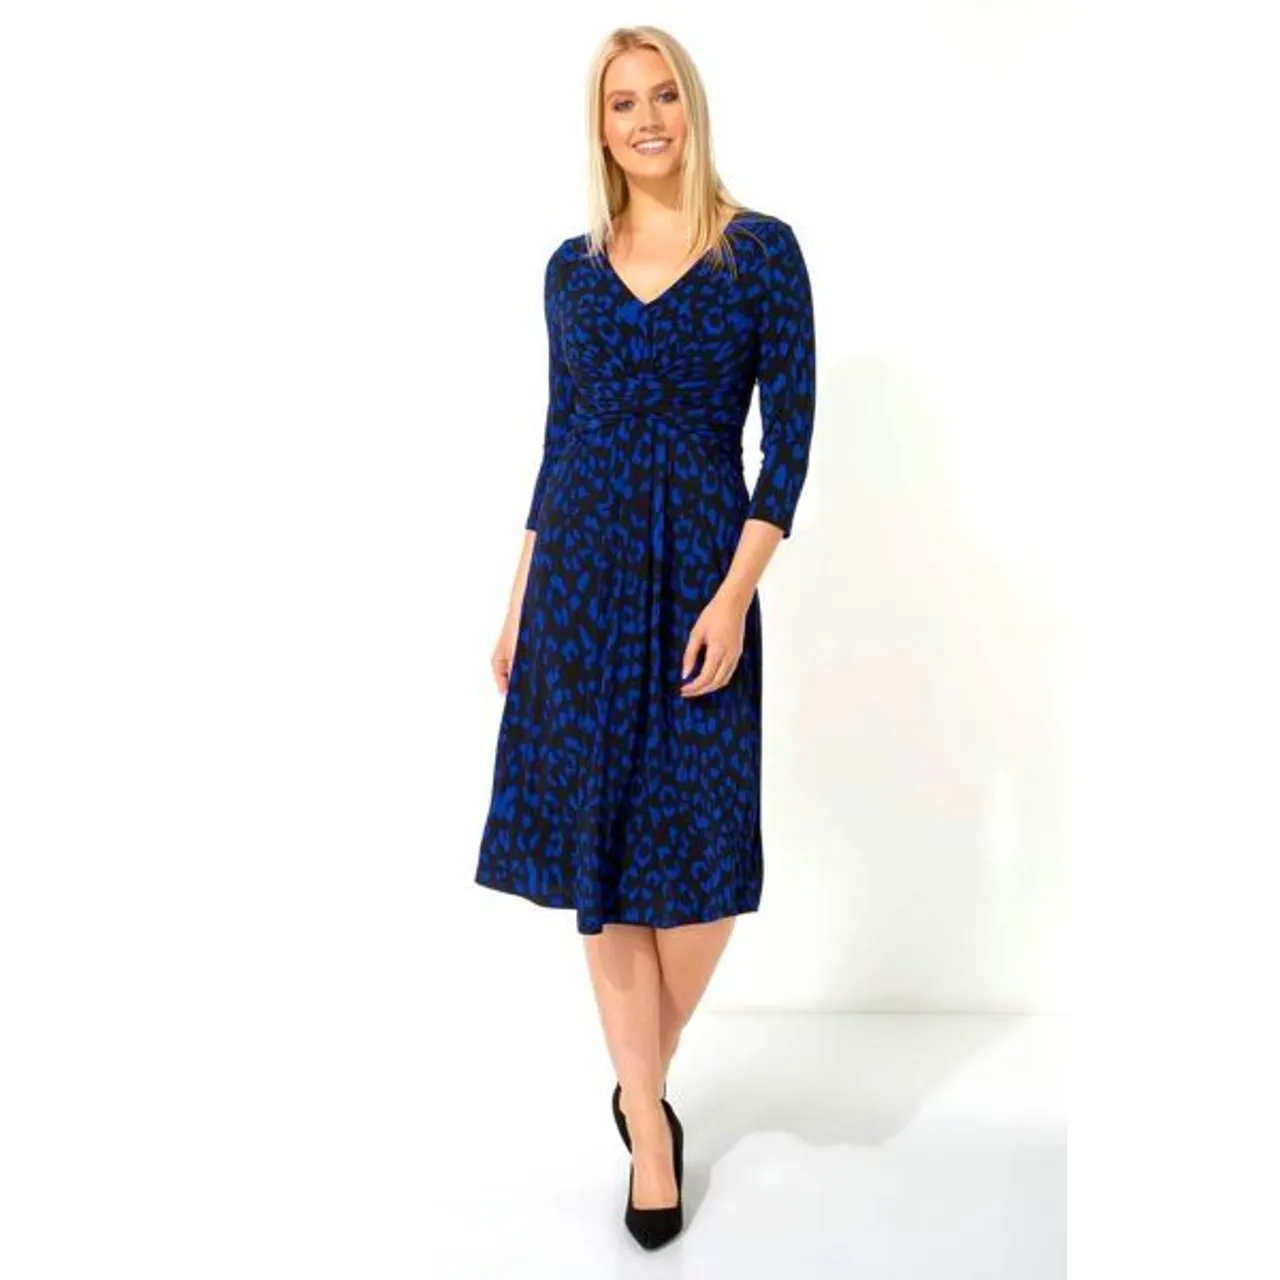 Roman Leopard Print Fit And Flare Dress in Royal Blue 20 female